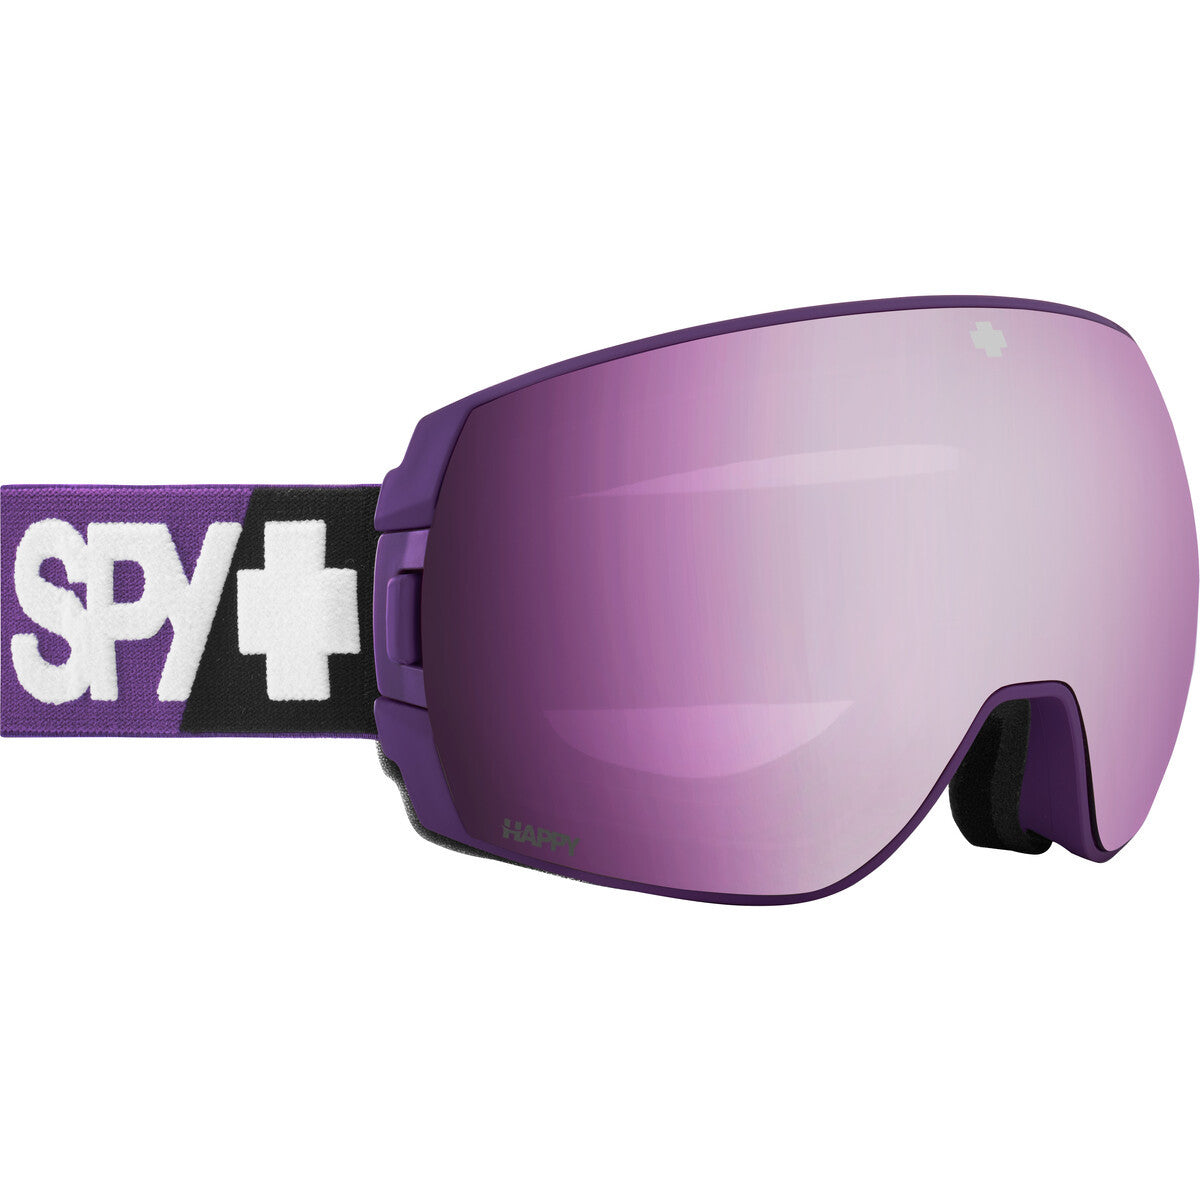 Spy Legacy Goggles  Purple Large-Extra Large L-XL 57-60